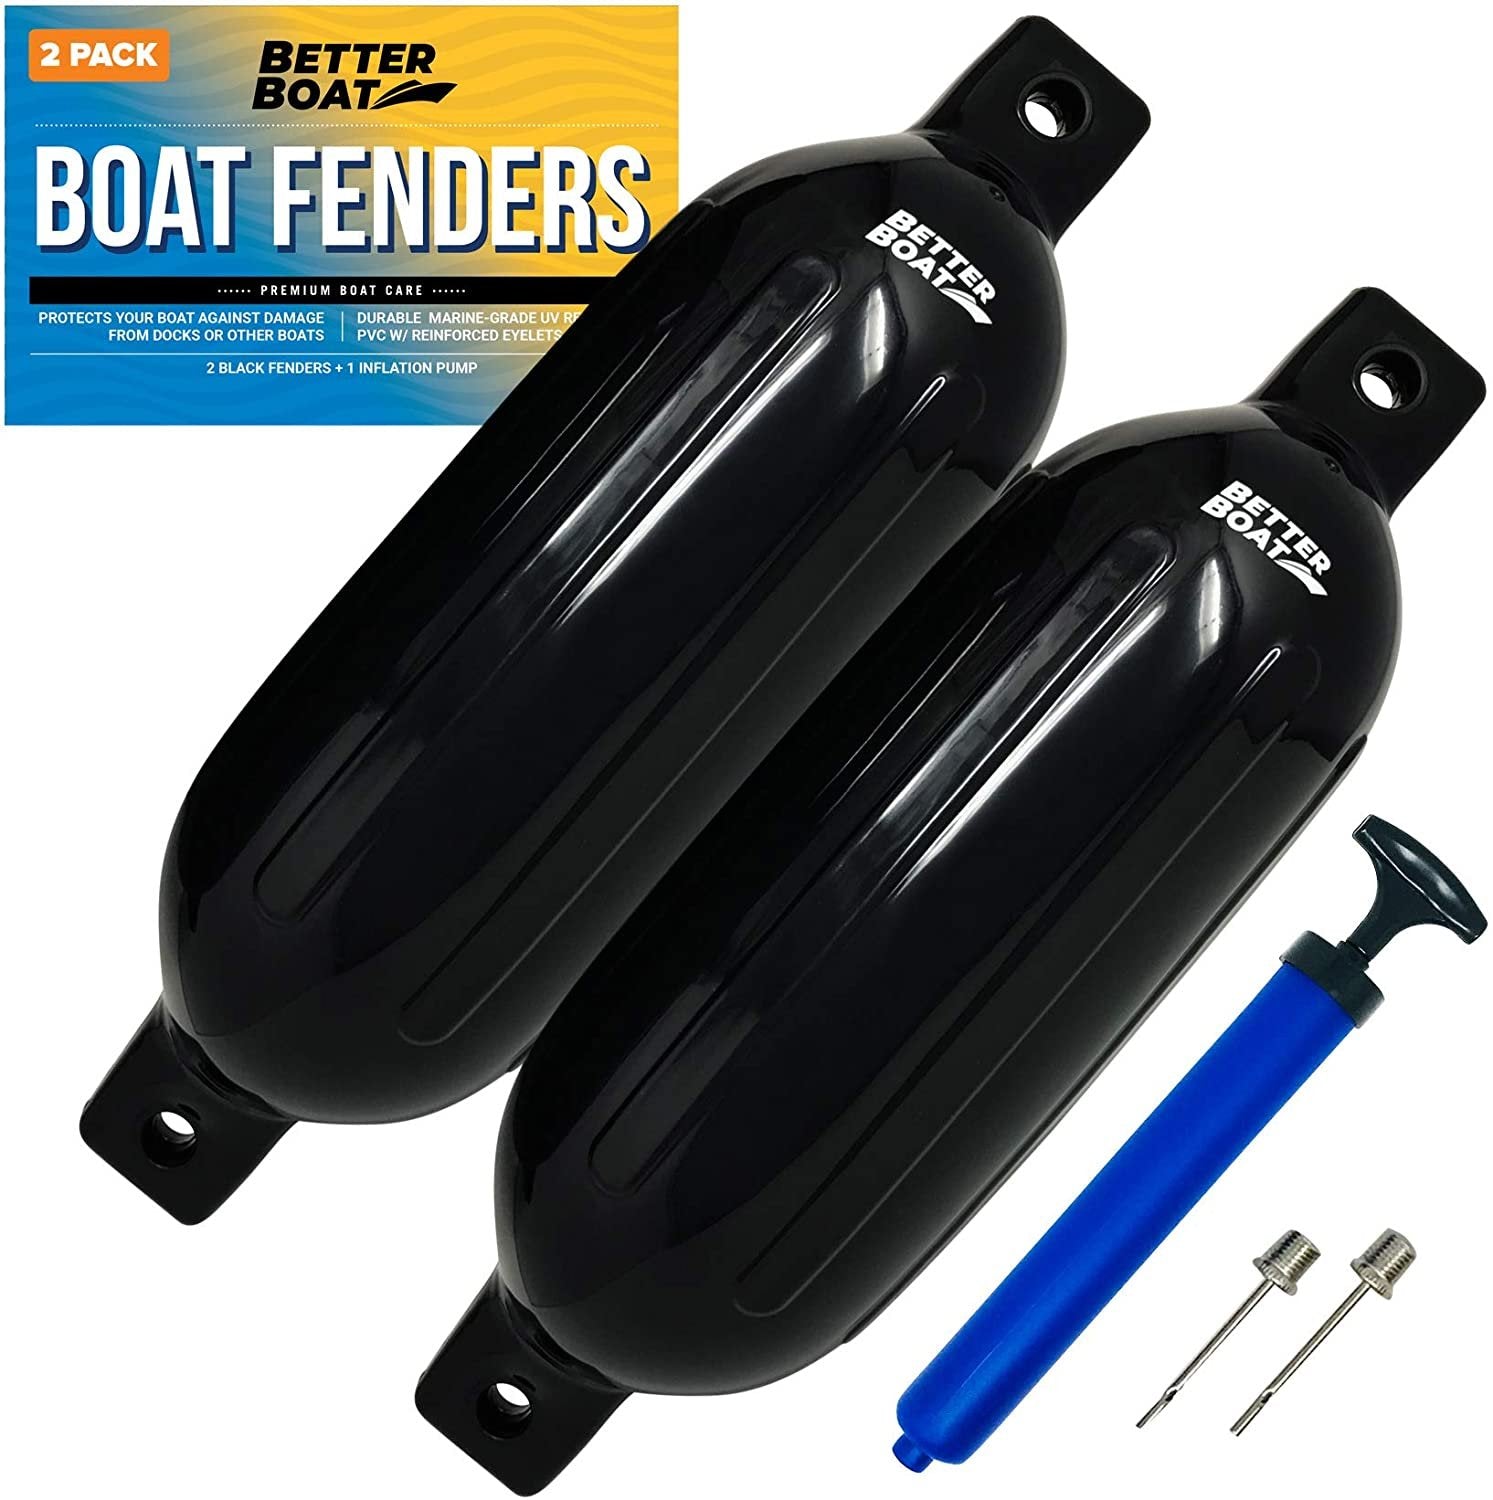 2 Pack Boat Fenders for Docking Boat Bumpers for Docking with Pump Boat Accessories Boat Dock Bumpers Set Buoys Pontoons Buoy Inflatable Fender Marine Bouys 23" x 6.5" Black Blue or White